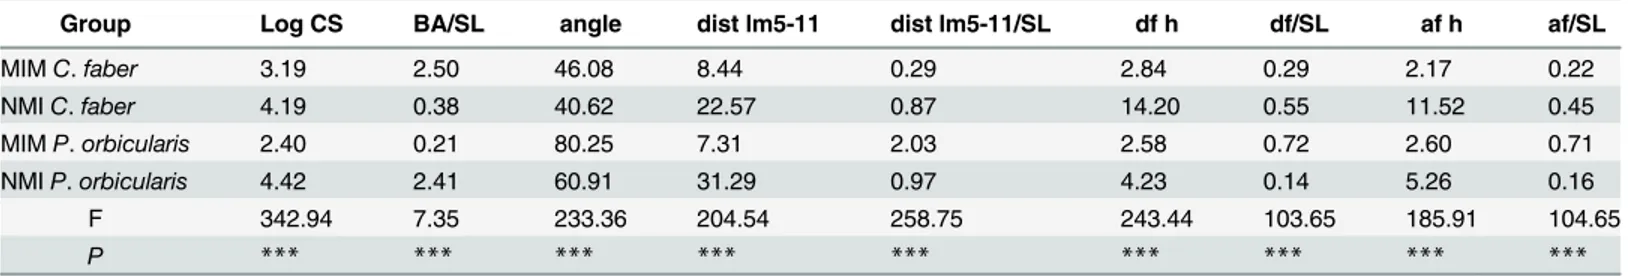 Table 2. Multiple Analyses of Variance. MANOVA results showing variation in measurements made on mimetic (MIM) and non-mimetic (NMI) individuals of C